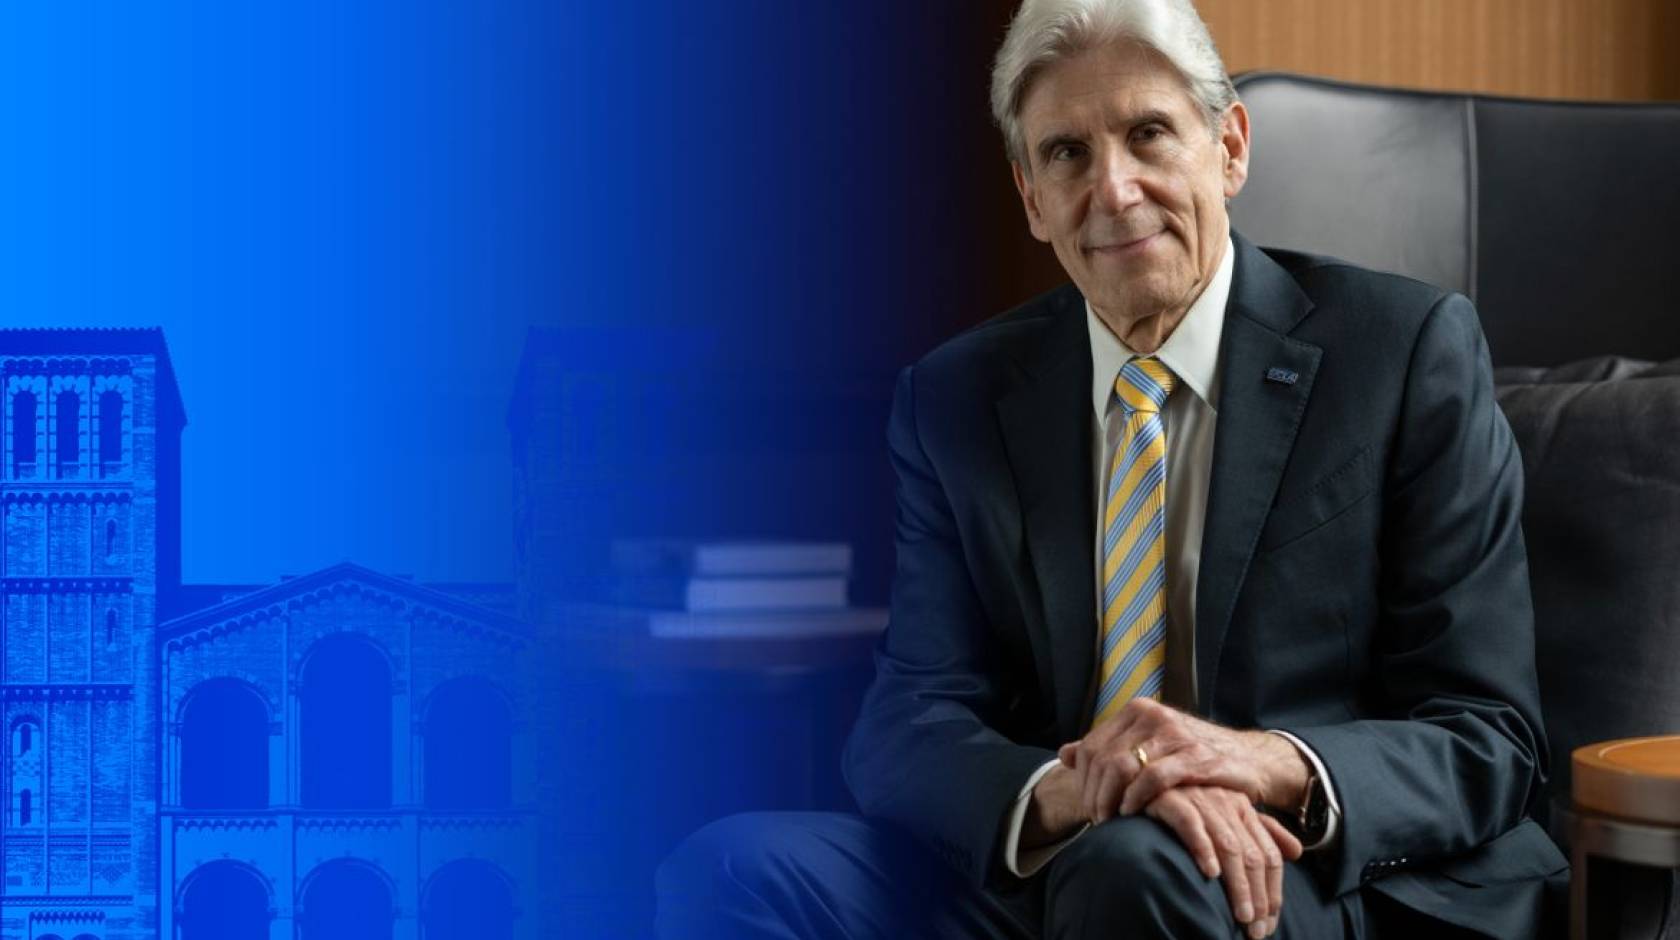 On the left side of the image, UCLA's Royce Hall with a blue layer over it; on the right, a man with a blue and gold tie, white hair, in a suit in a wood-paneled office (Dr. Frenk)